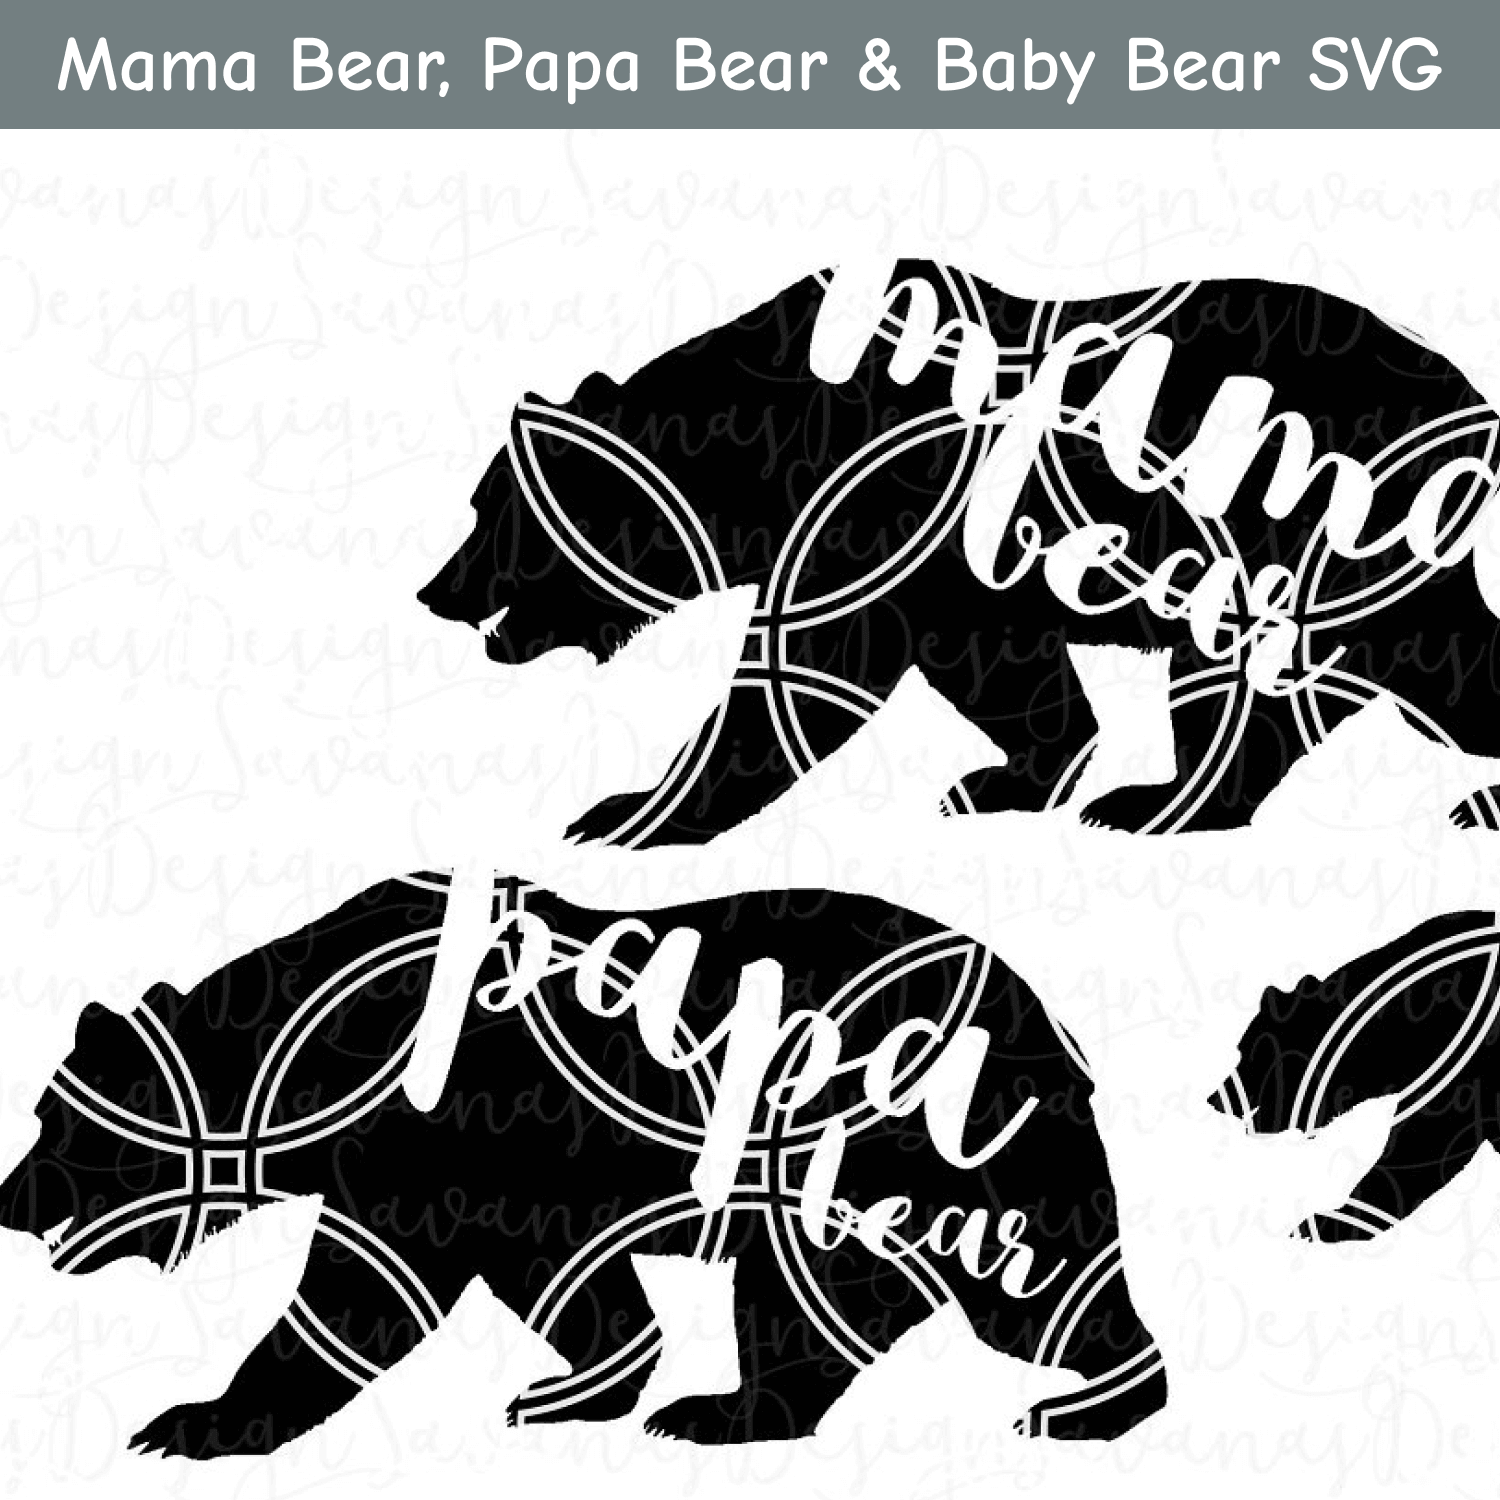 Pair of bear silhouettes with the words mama bear and baby bear svg.